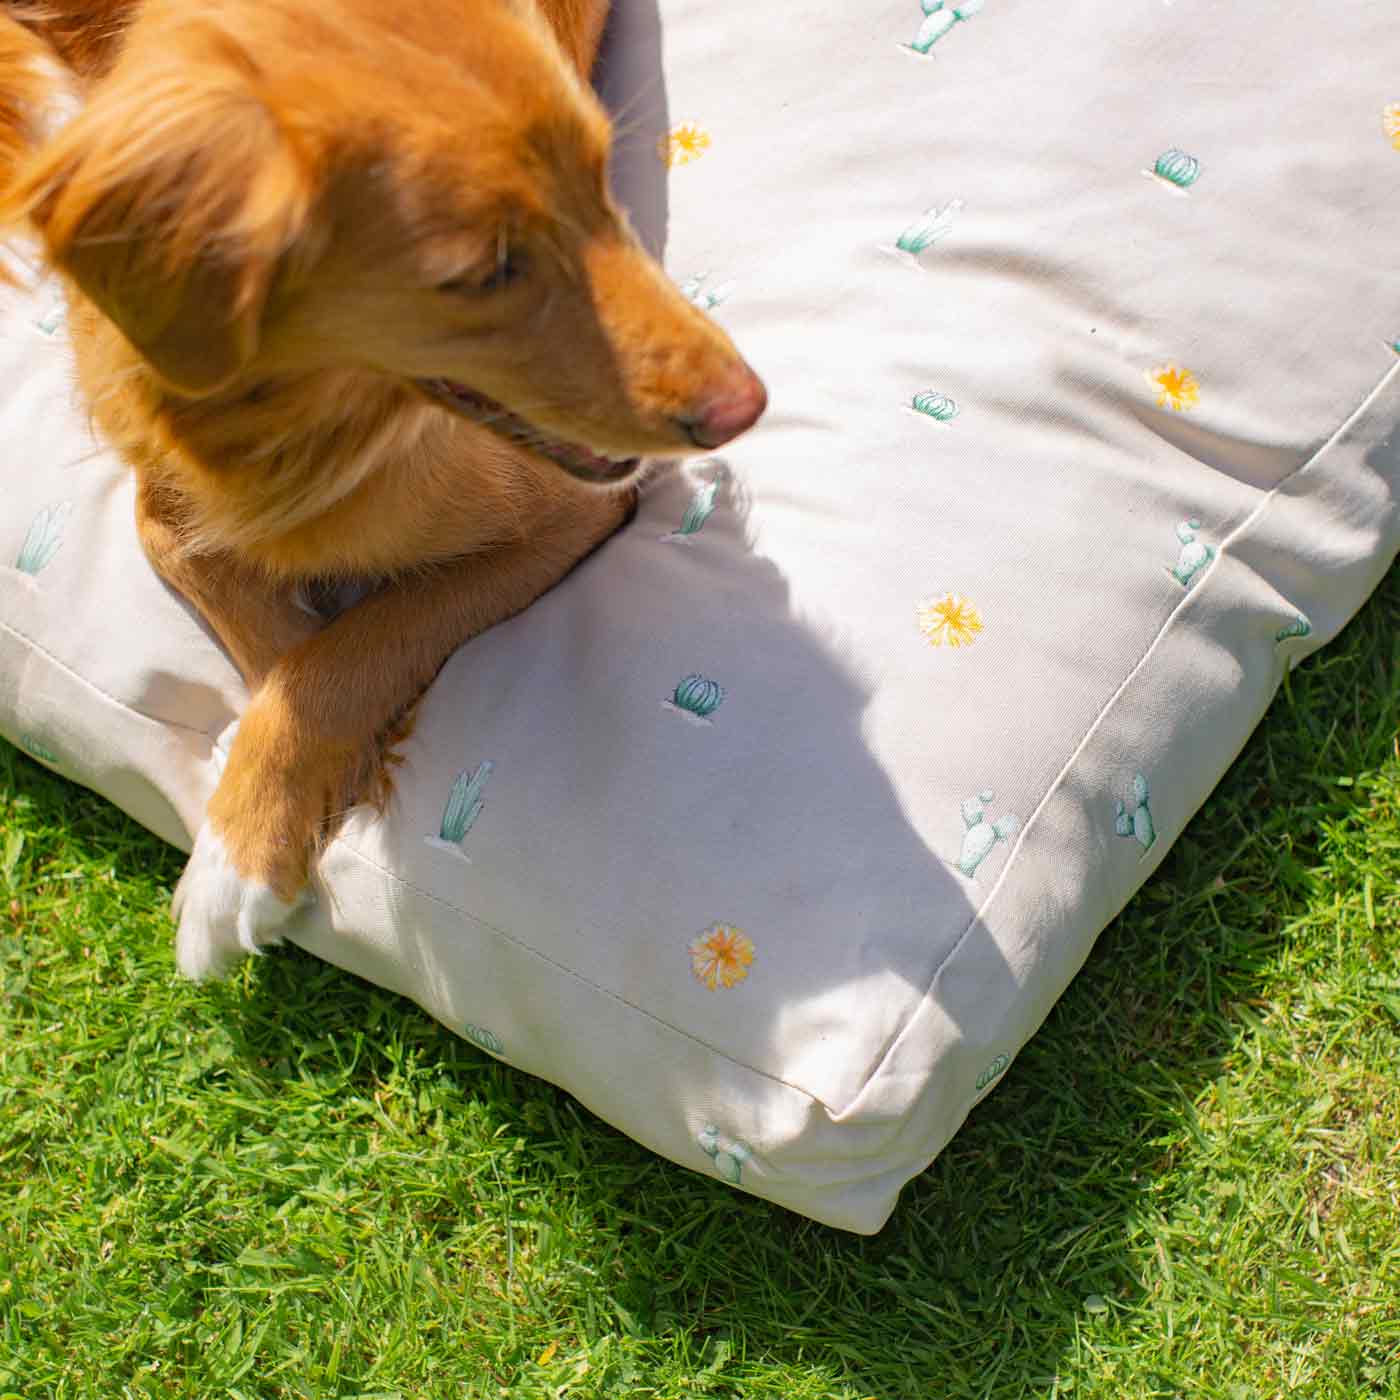 Luxury Sleepeeze Dog Cushion in Cactus, The Perfect Pet Bed Time Accessory! Available Now at Lords & Labradors US